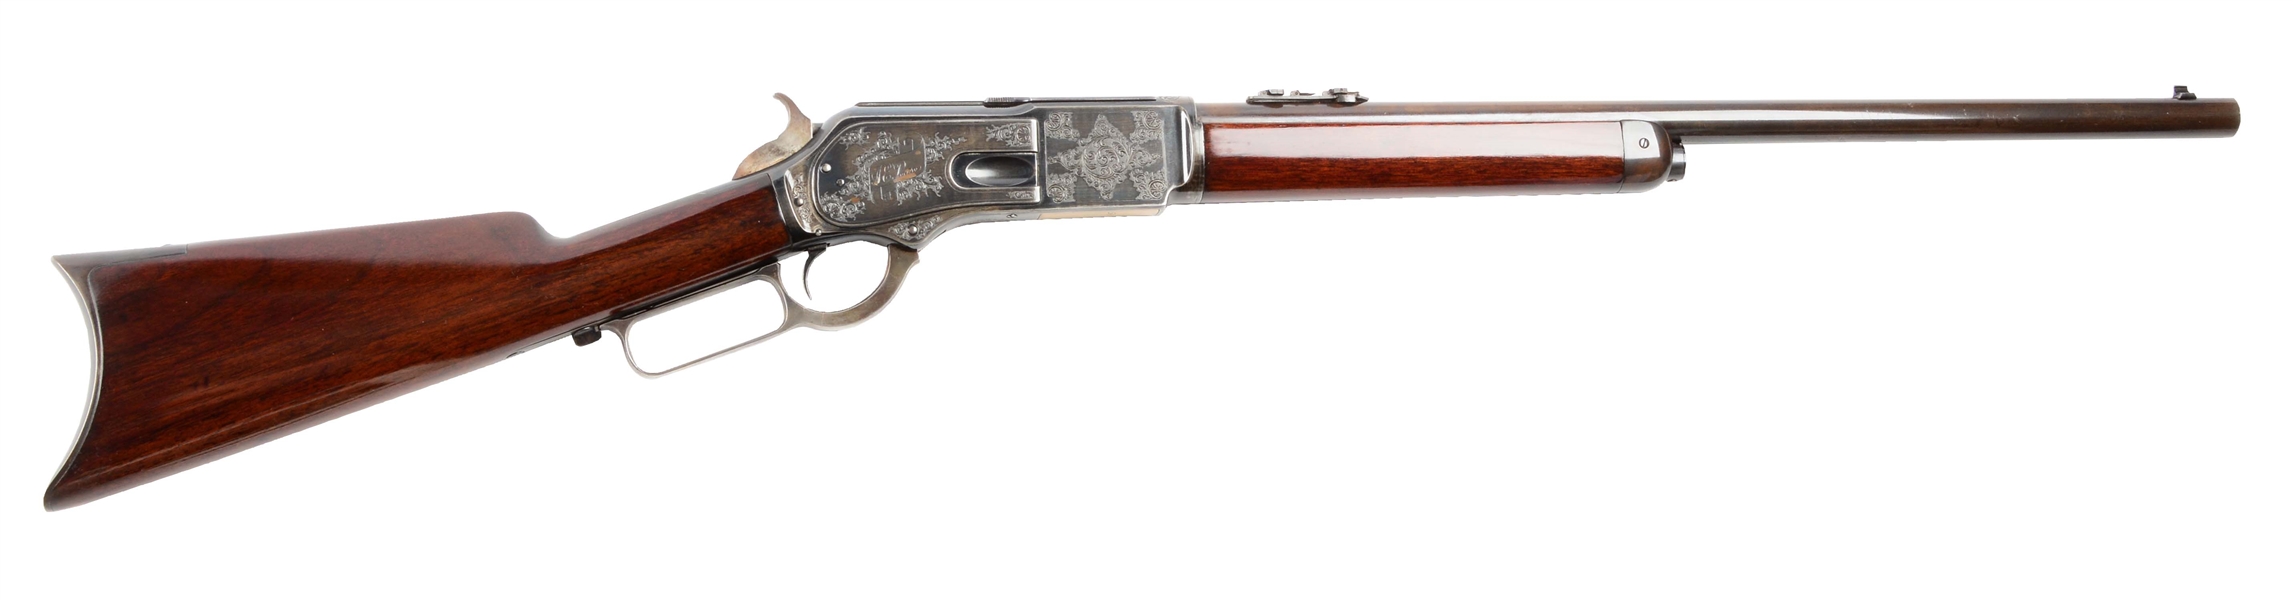 (A) PRESENTATION DELUXE 1876 WINCHESTER ENGLISH "BIG 50" SHORT RIFLE.